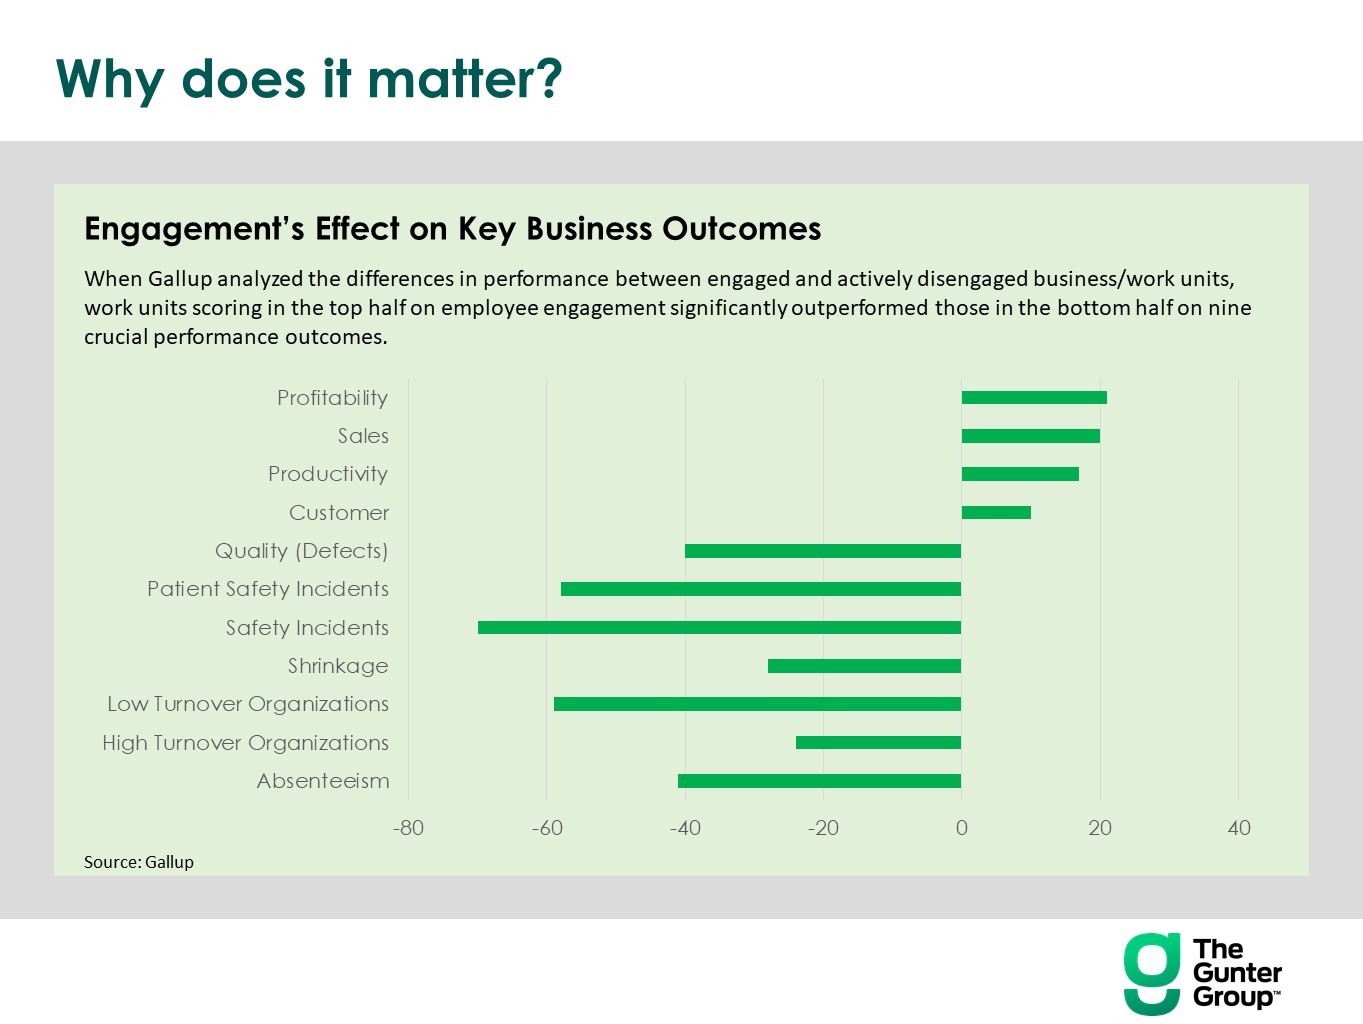 Pic 1 Engagements Effect on Key Business Outcomes